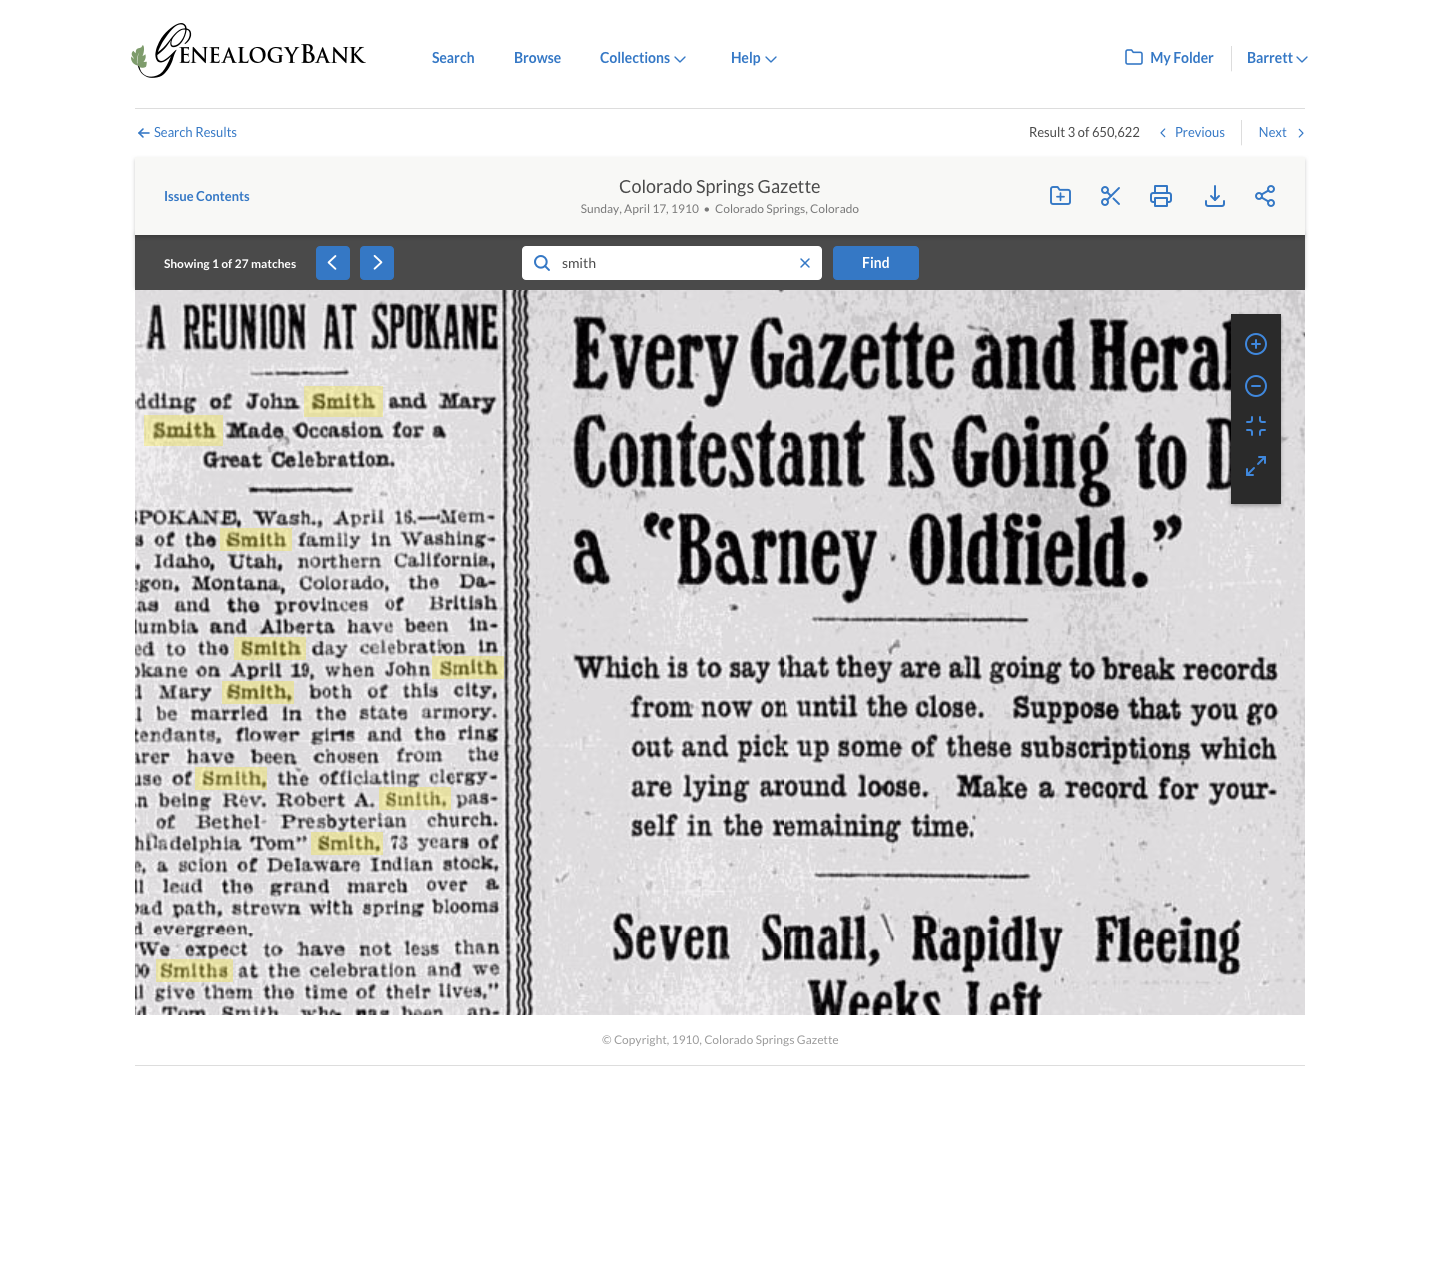 Image Viewer Design Update — Newspaper Display Zoomed with Dynamic Highlighting of Search Term